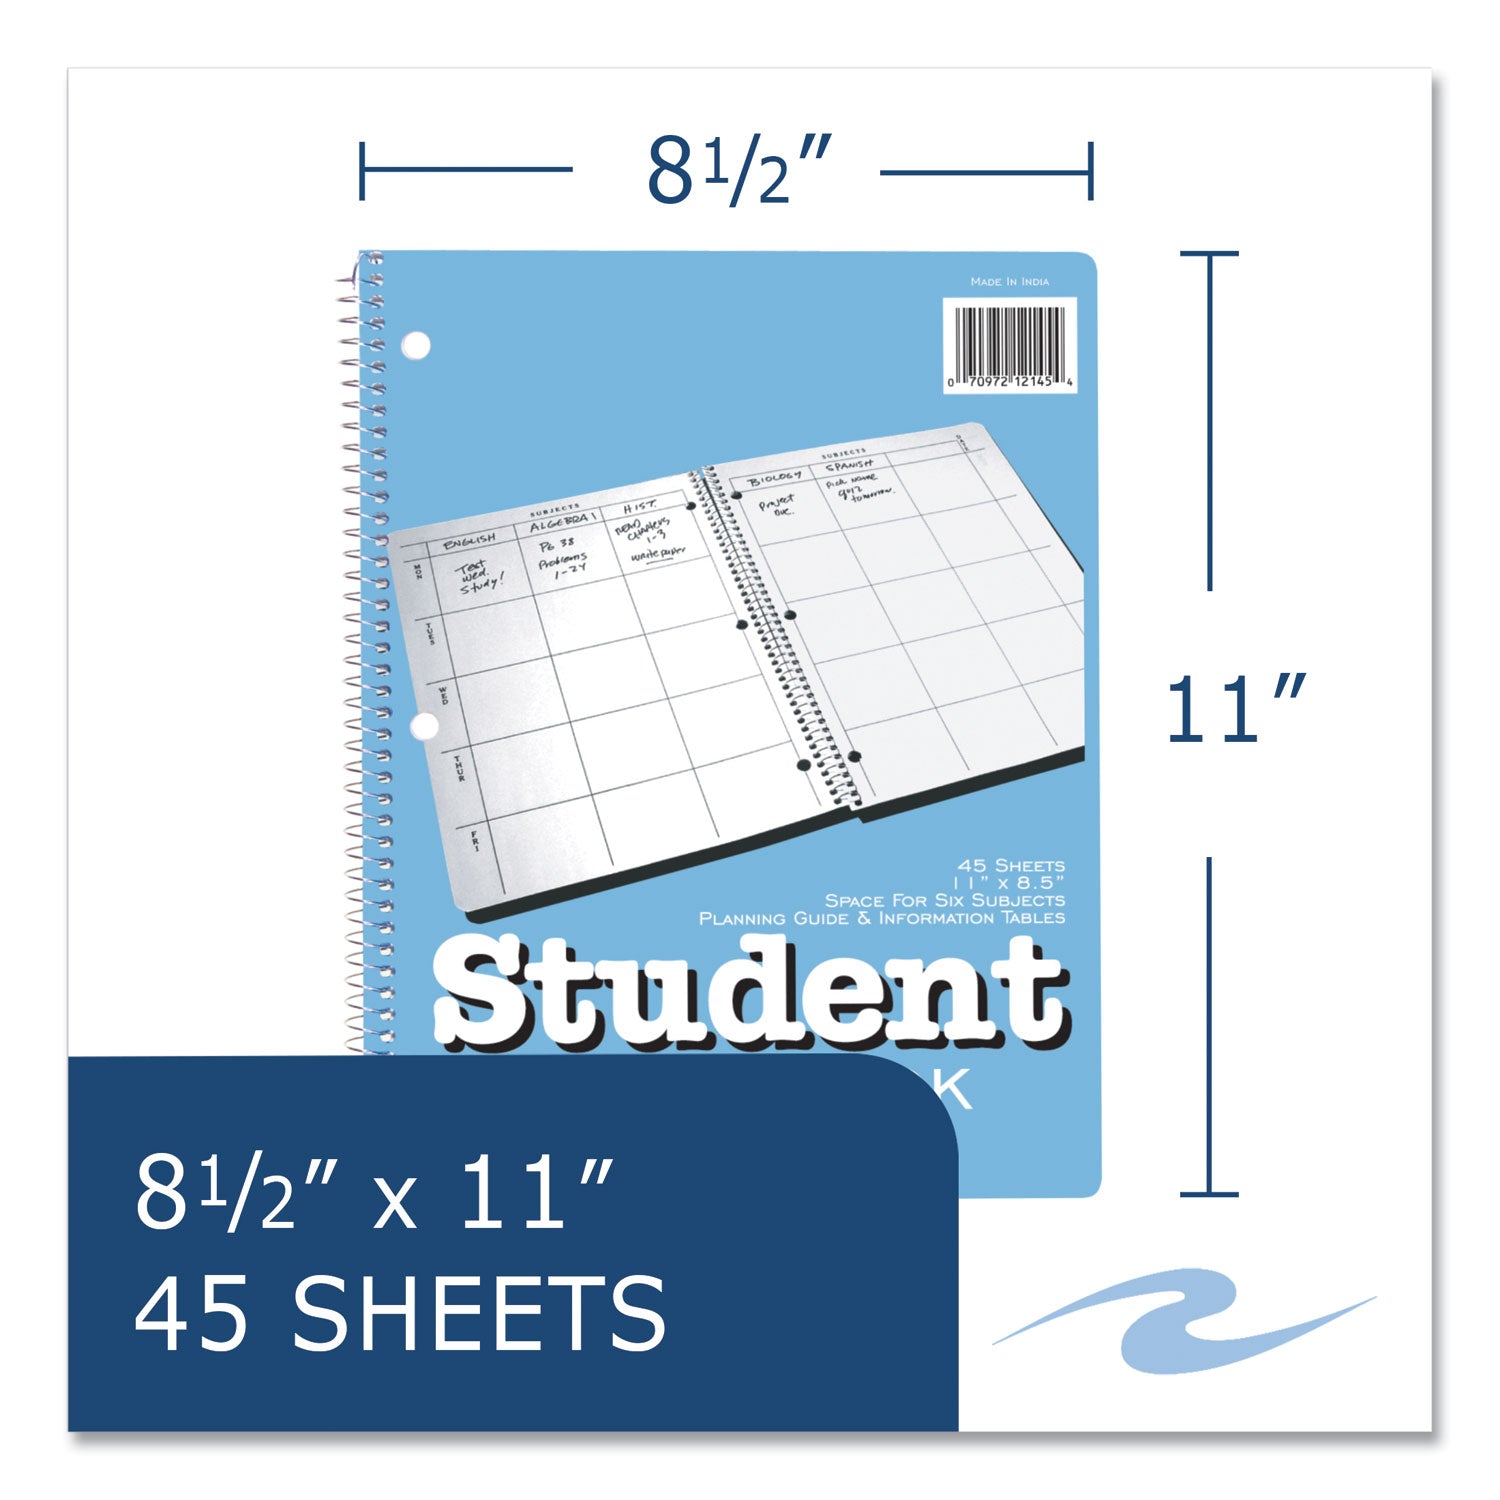 student-plan-book-40-weeks-six-subject-day-blue-white-cover-100-11-x-85-sheets_roa12145 - 2